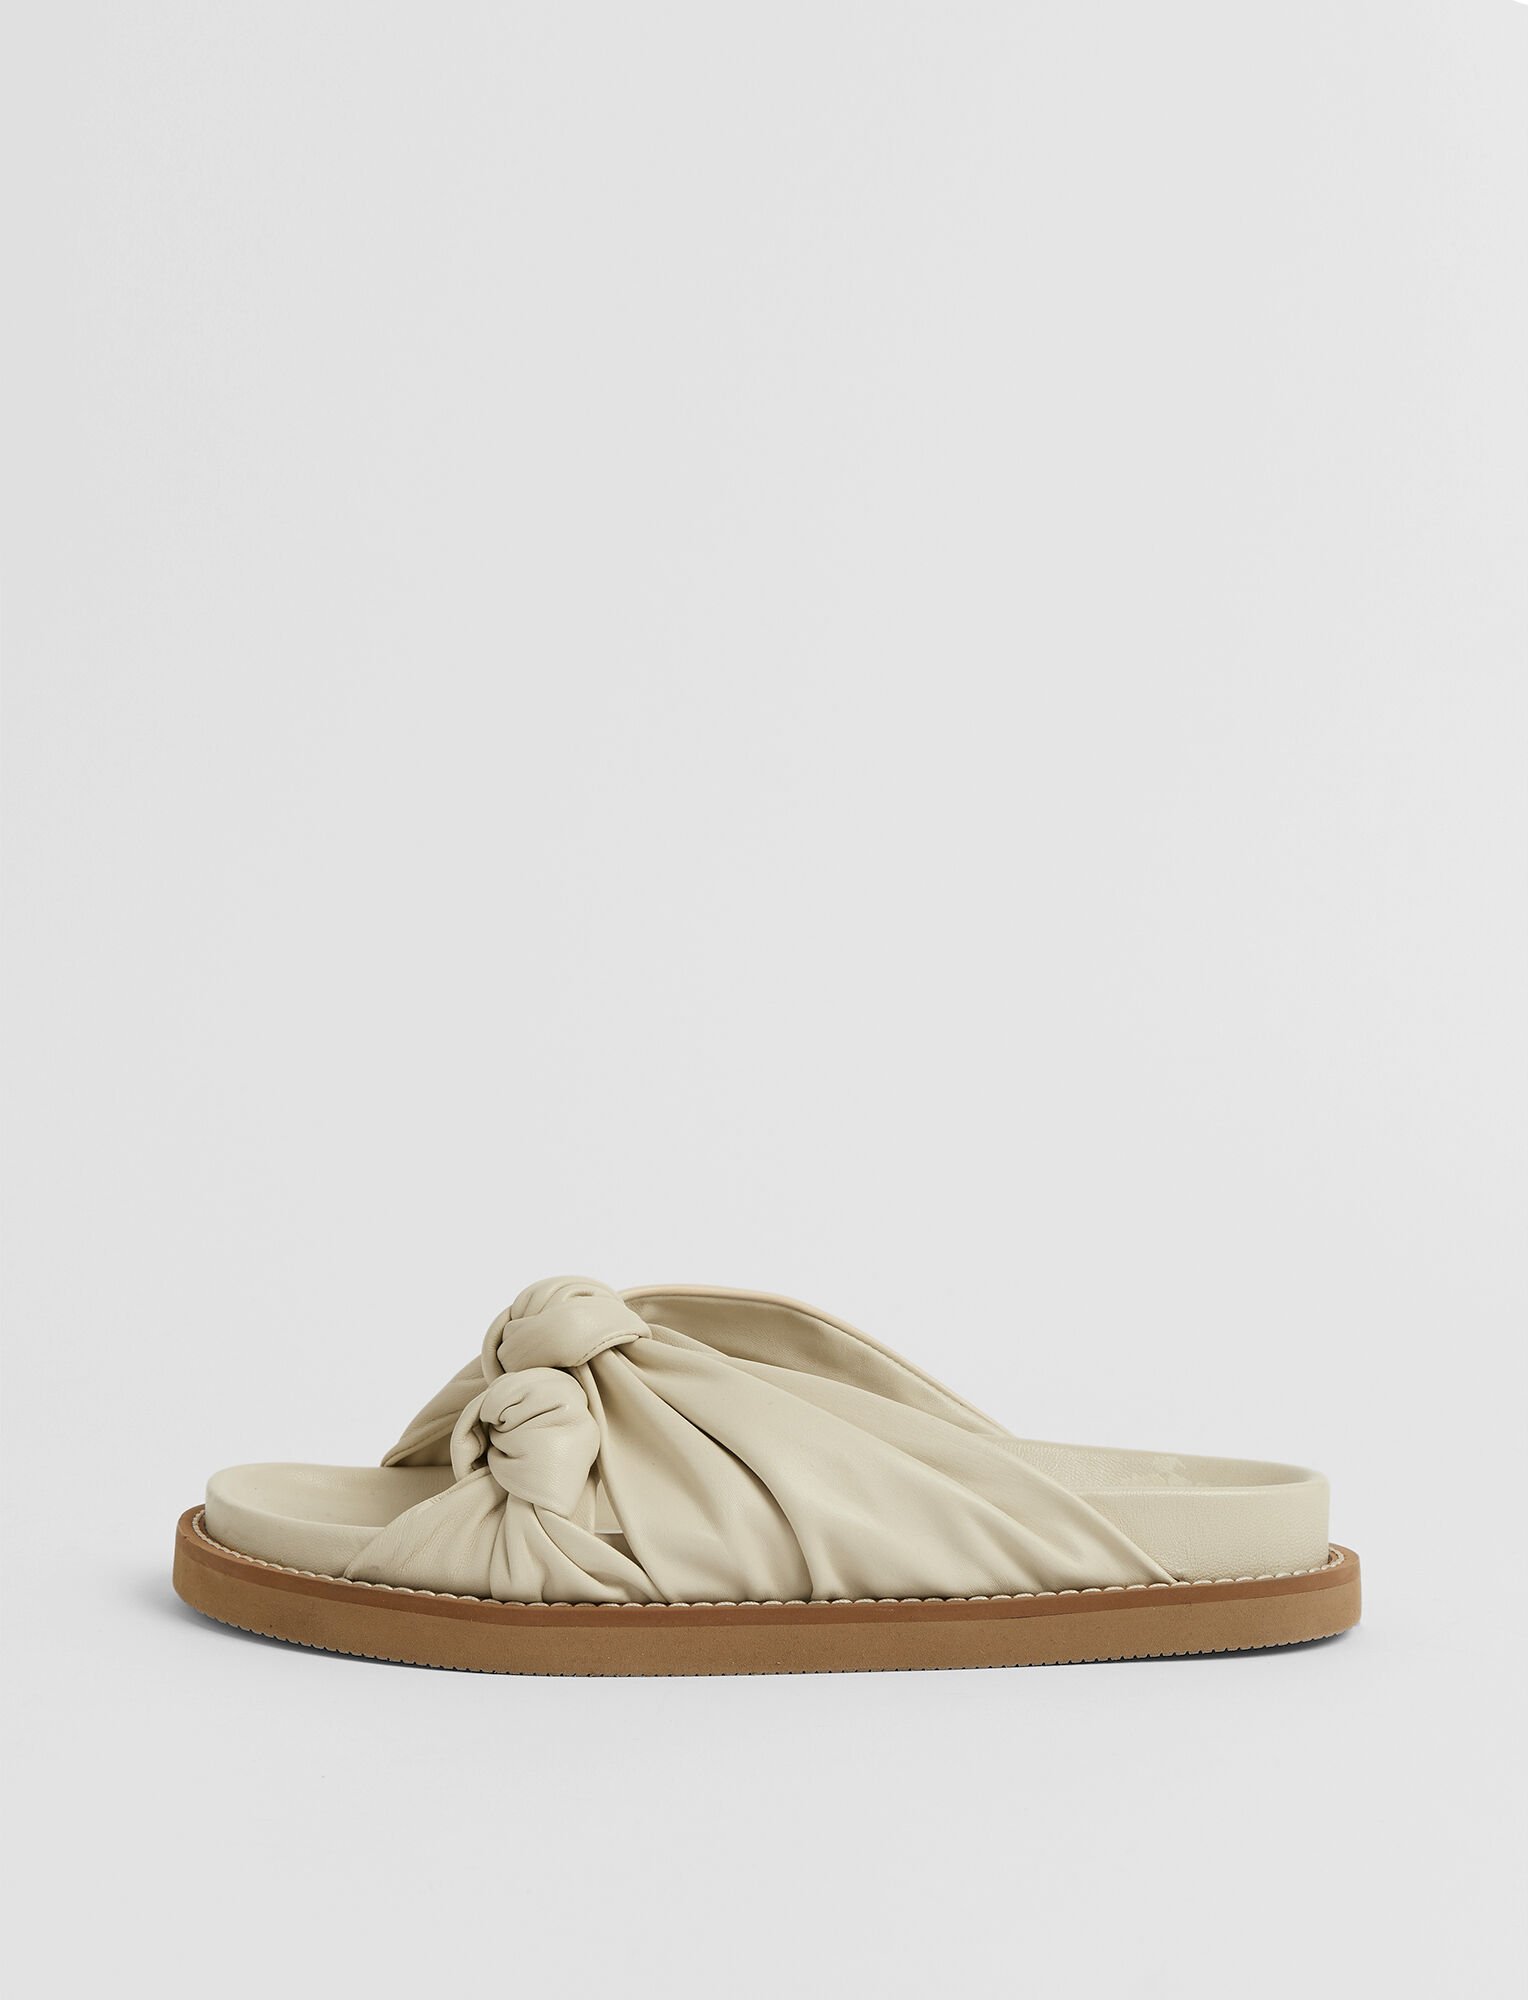 Joseph, Leather Big Knot Sandals, in Straw